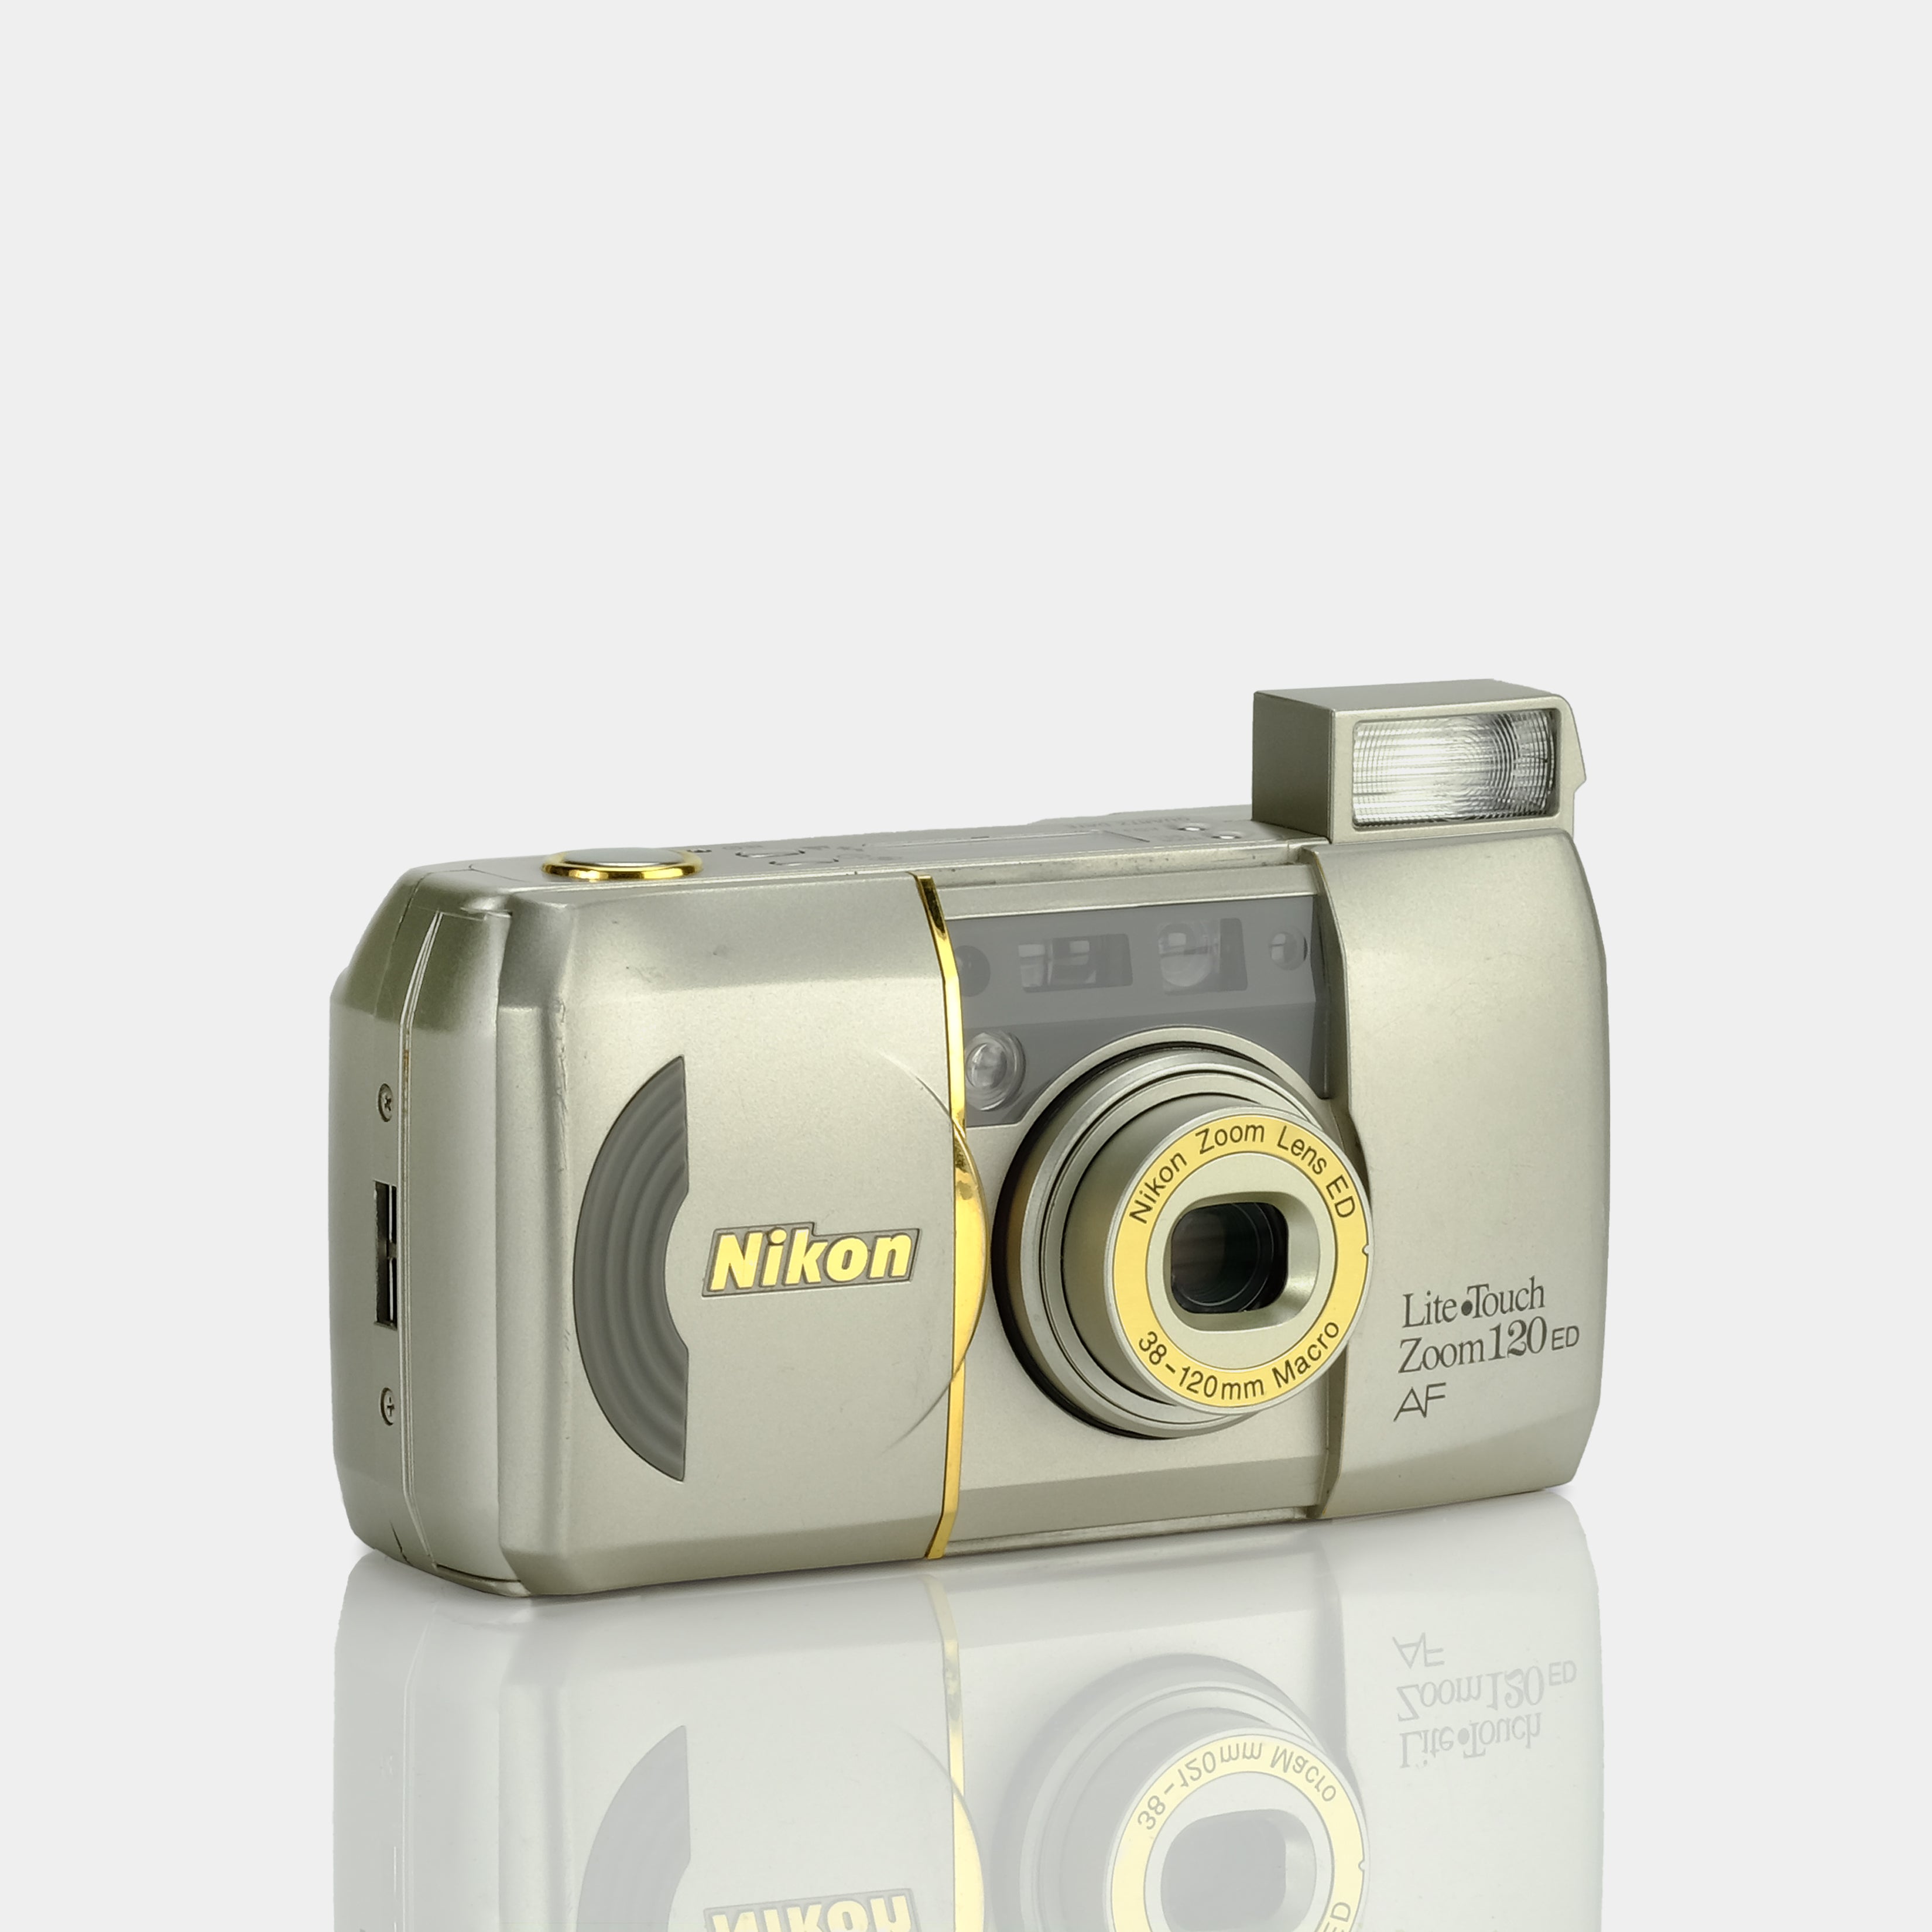 Nikon Lite-Touch Zoom 120ED AF 35mm Point and Shoot Film Camera